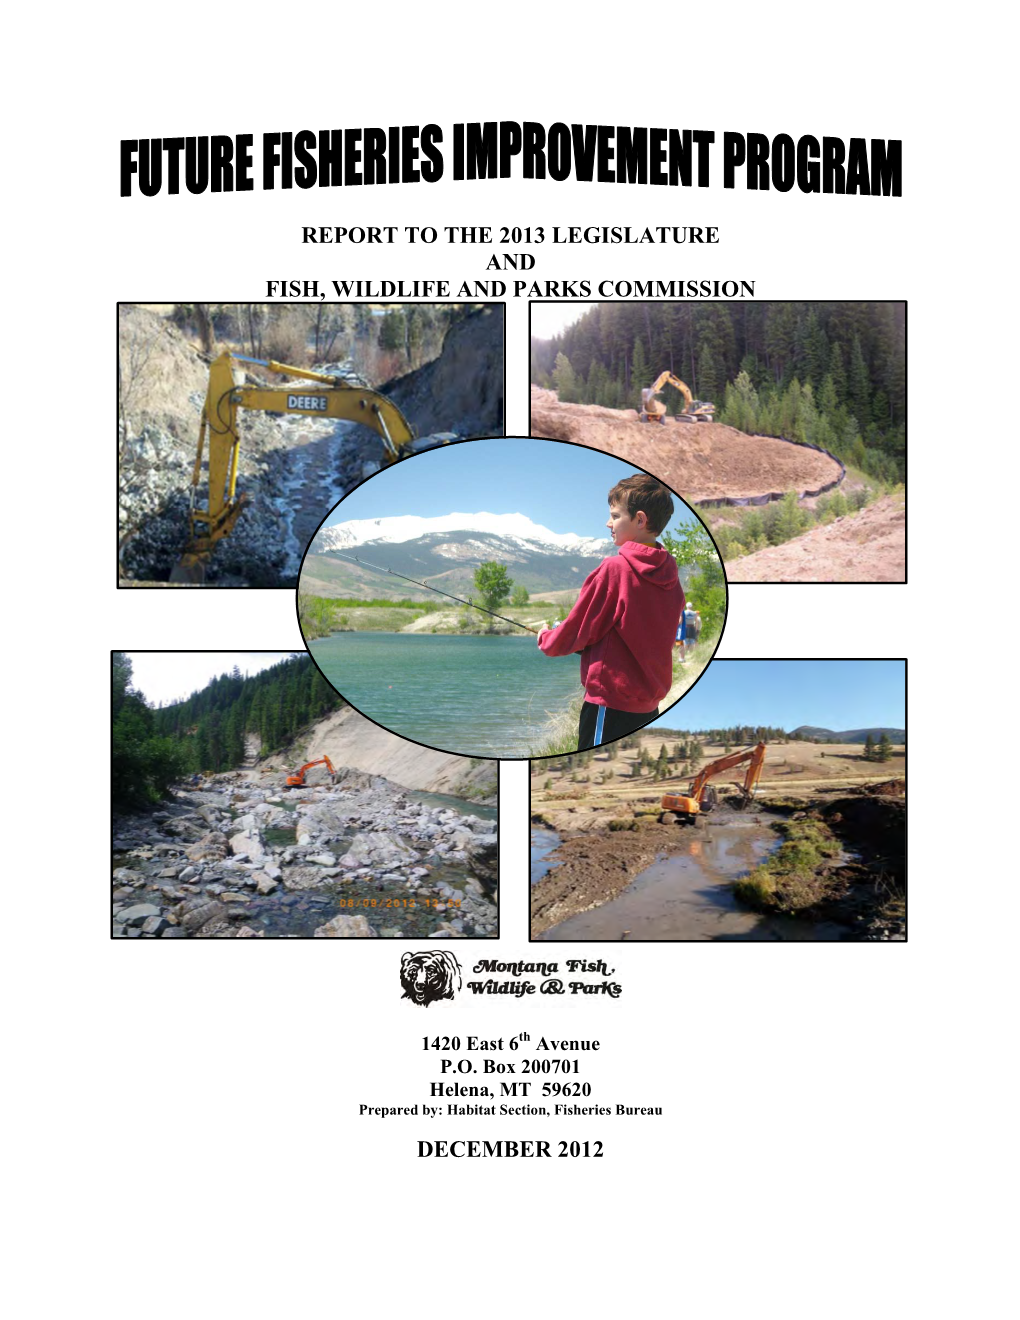 Future Fisheries Improvement Program and to the Bull Trout and Cutthroat Trout Enhancement Program (BT/CT)